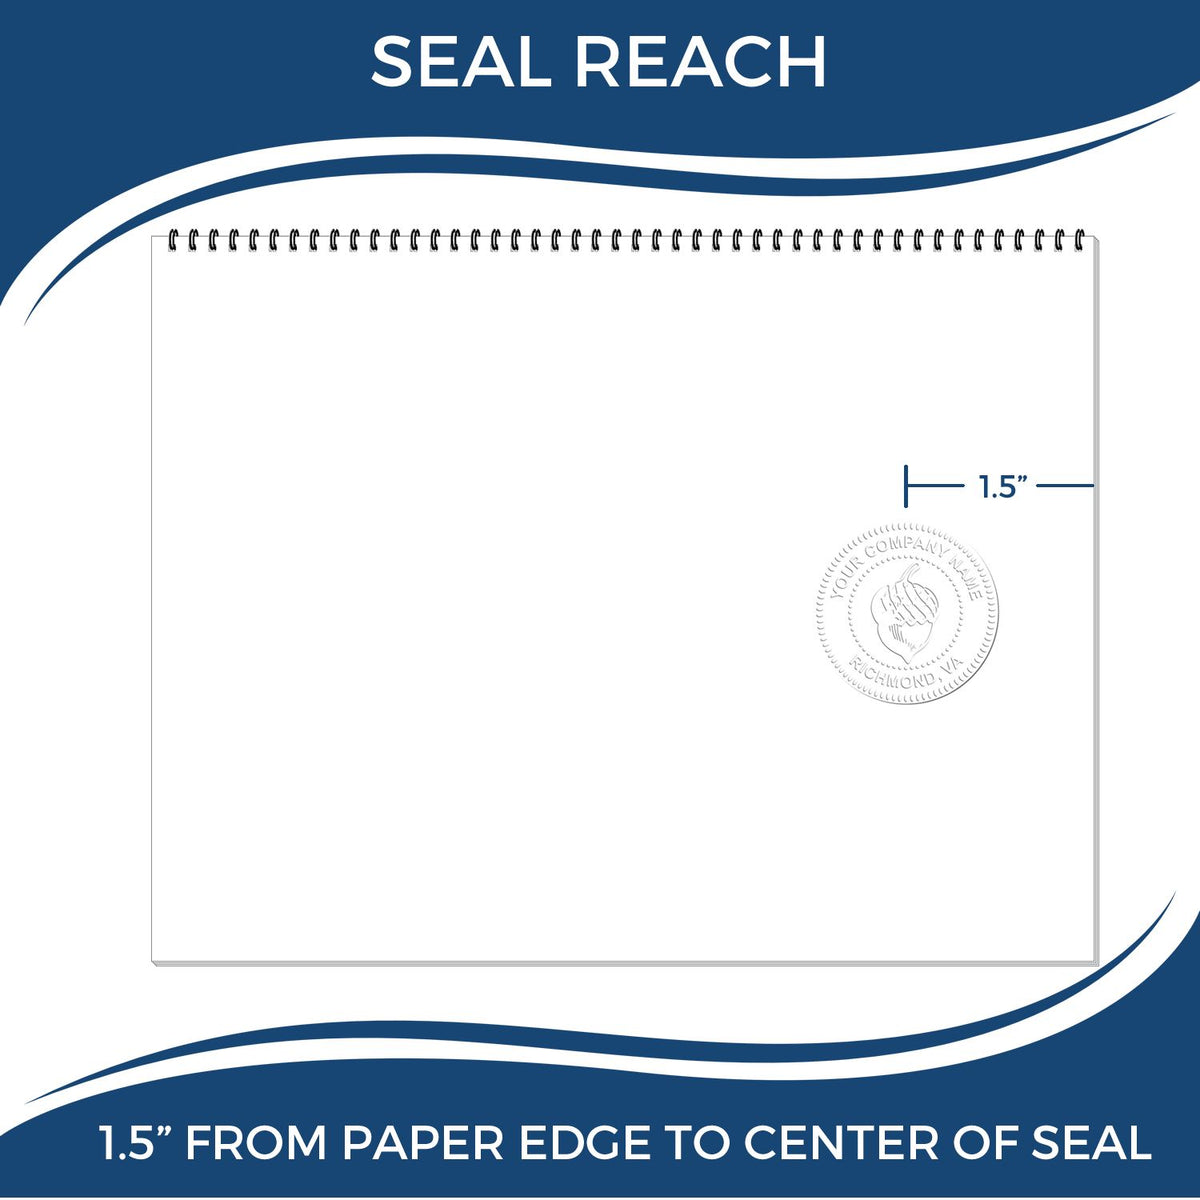 An infographic showing the seal reach which is represented by a ruler and a miniature seal image of the Gift Ohio Geologist Seal